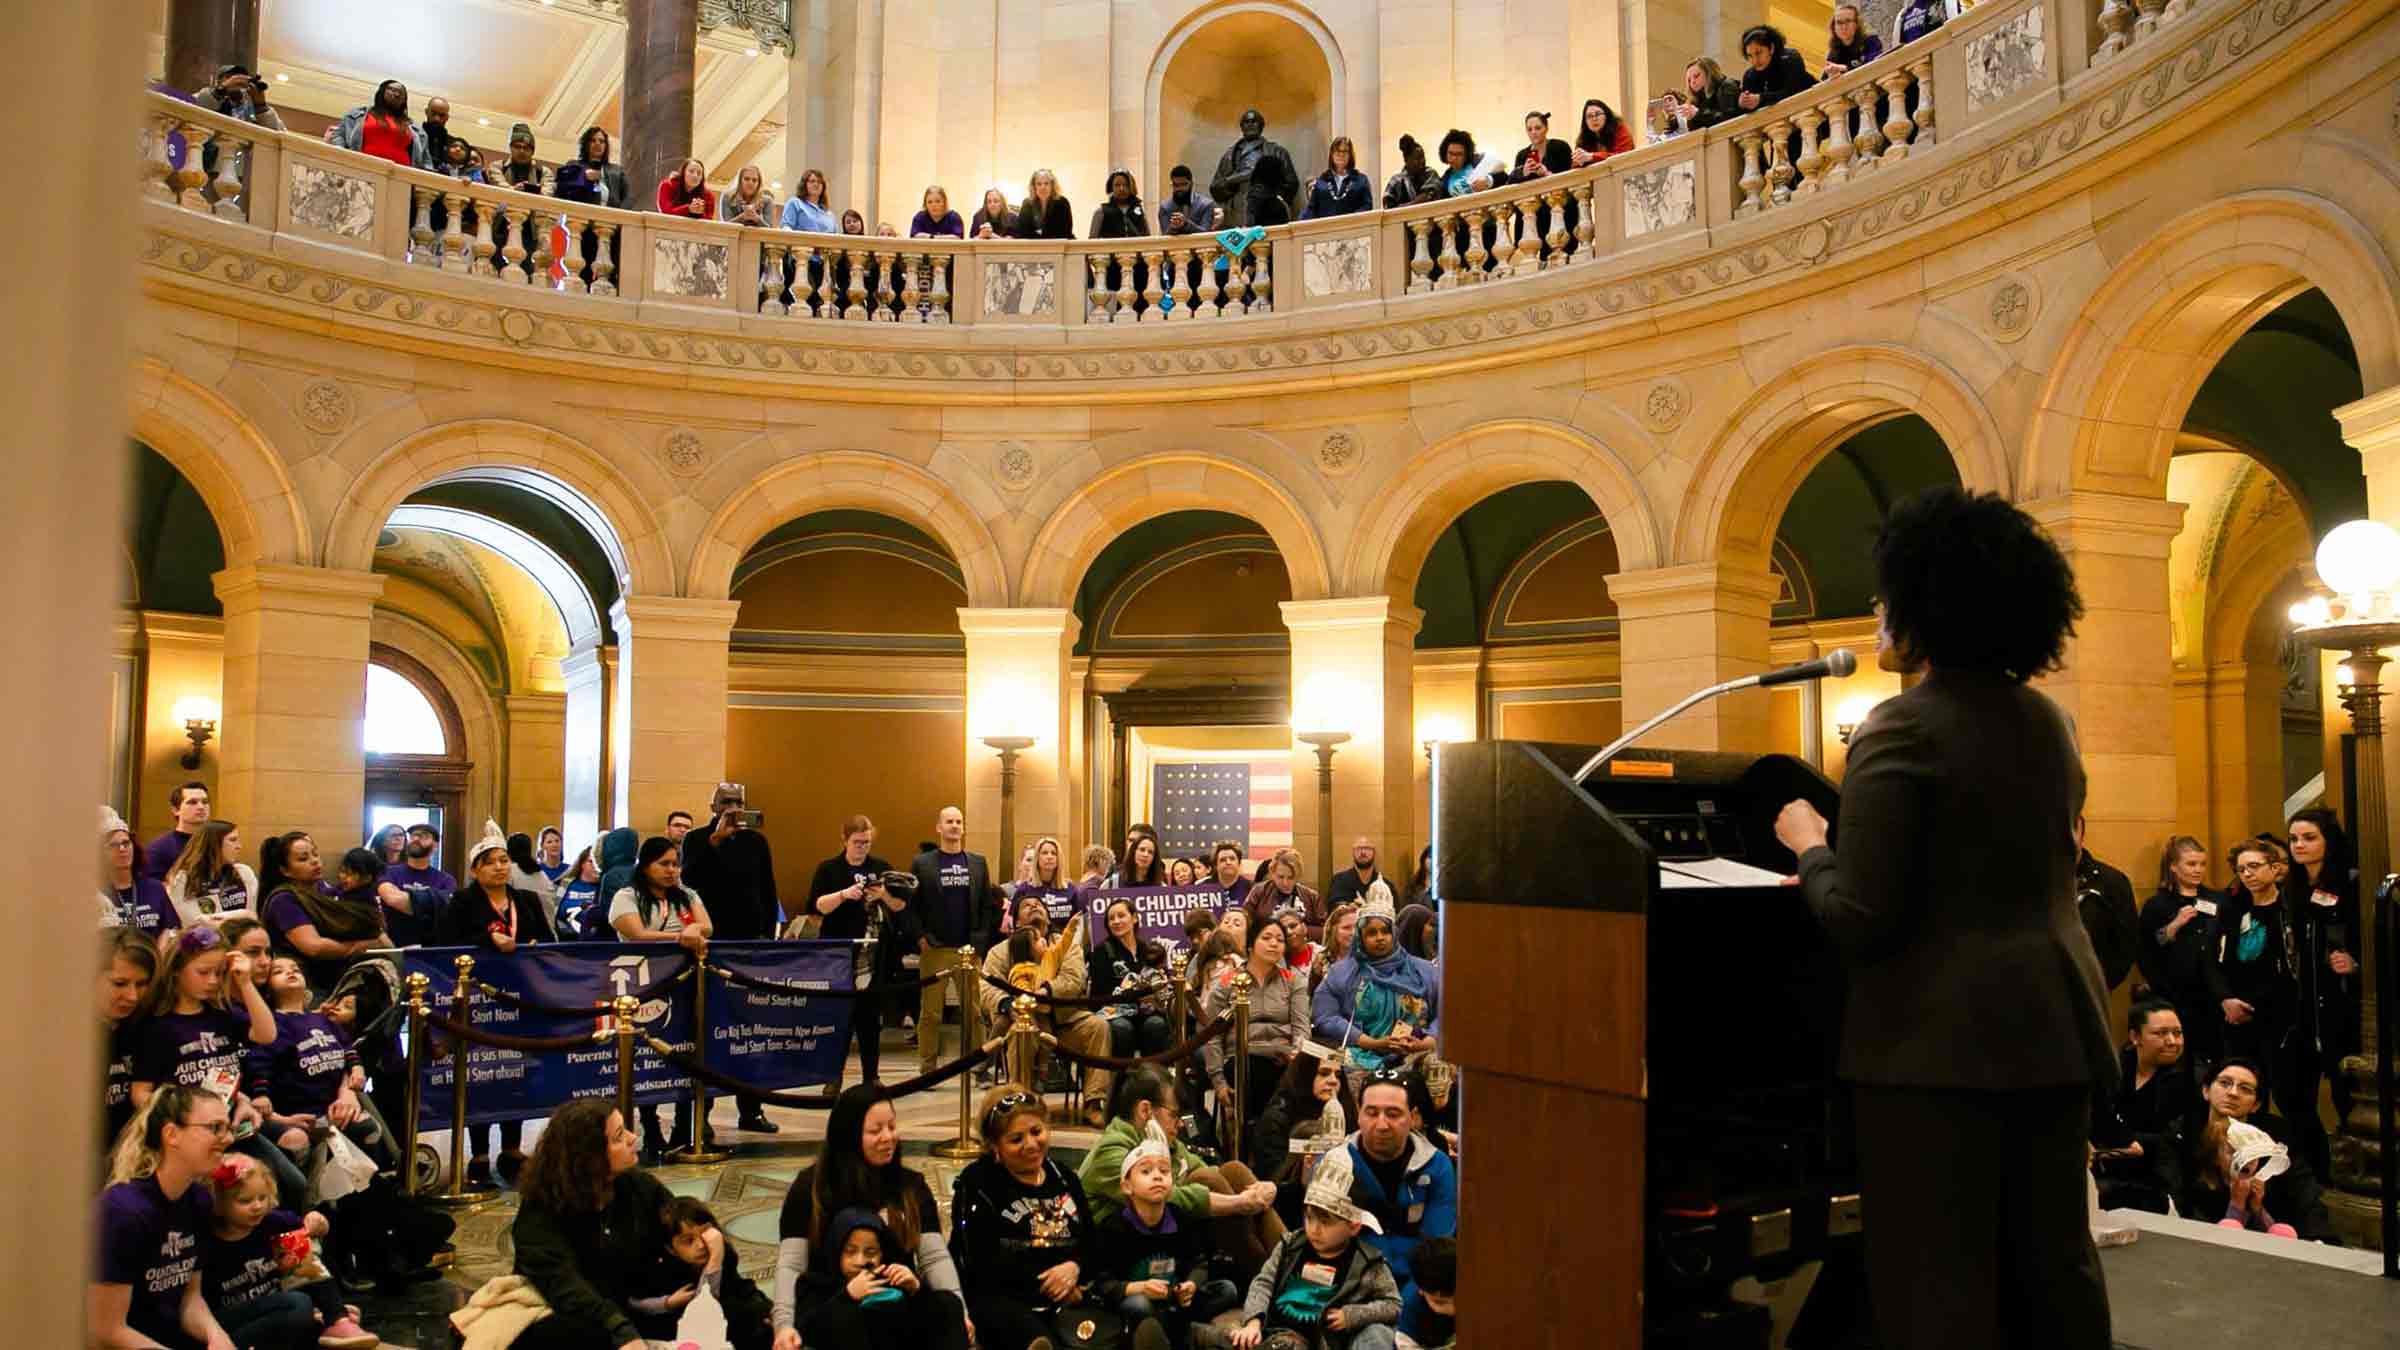 A speaker stands in the Minnesota state capital building addressing a group of early childhood education advocates